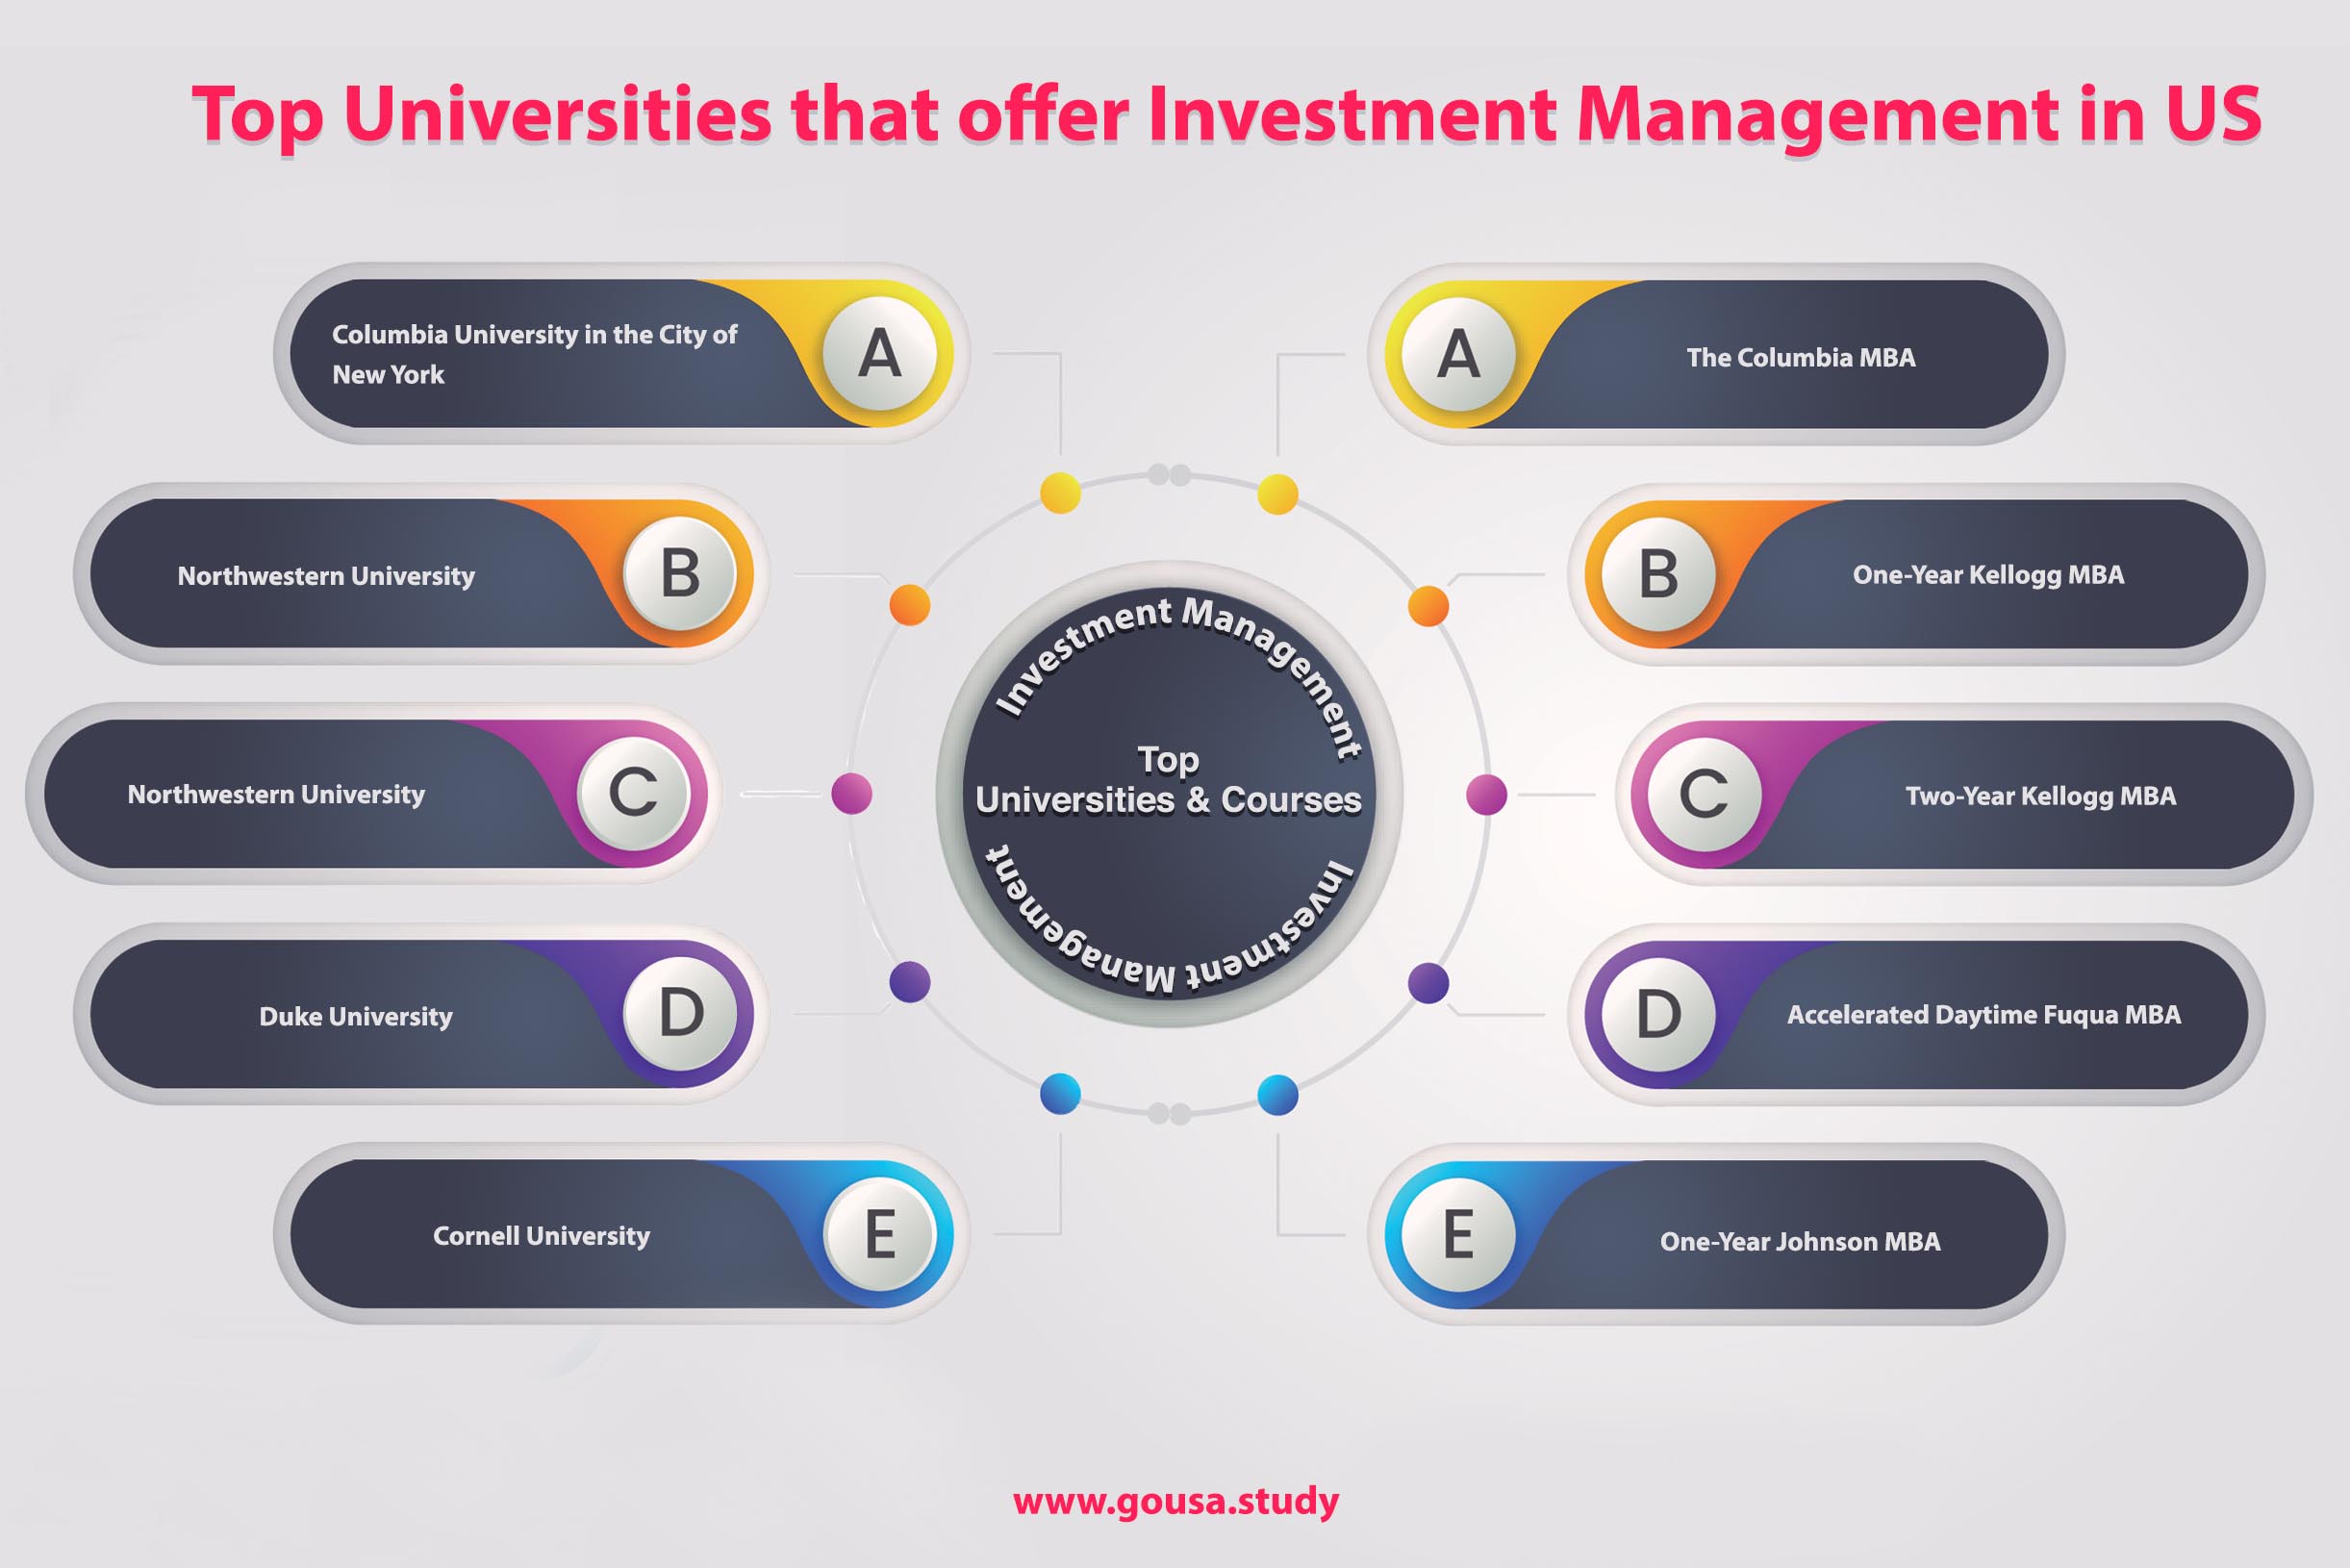 Top Universities that Offer Investment Management in US